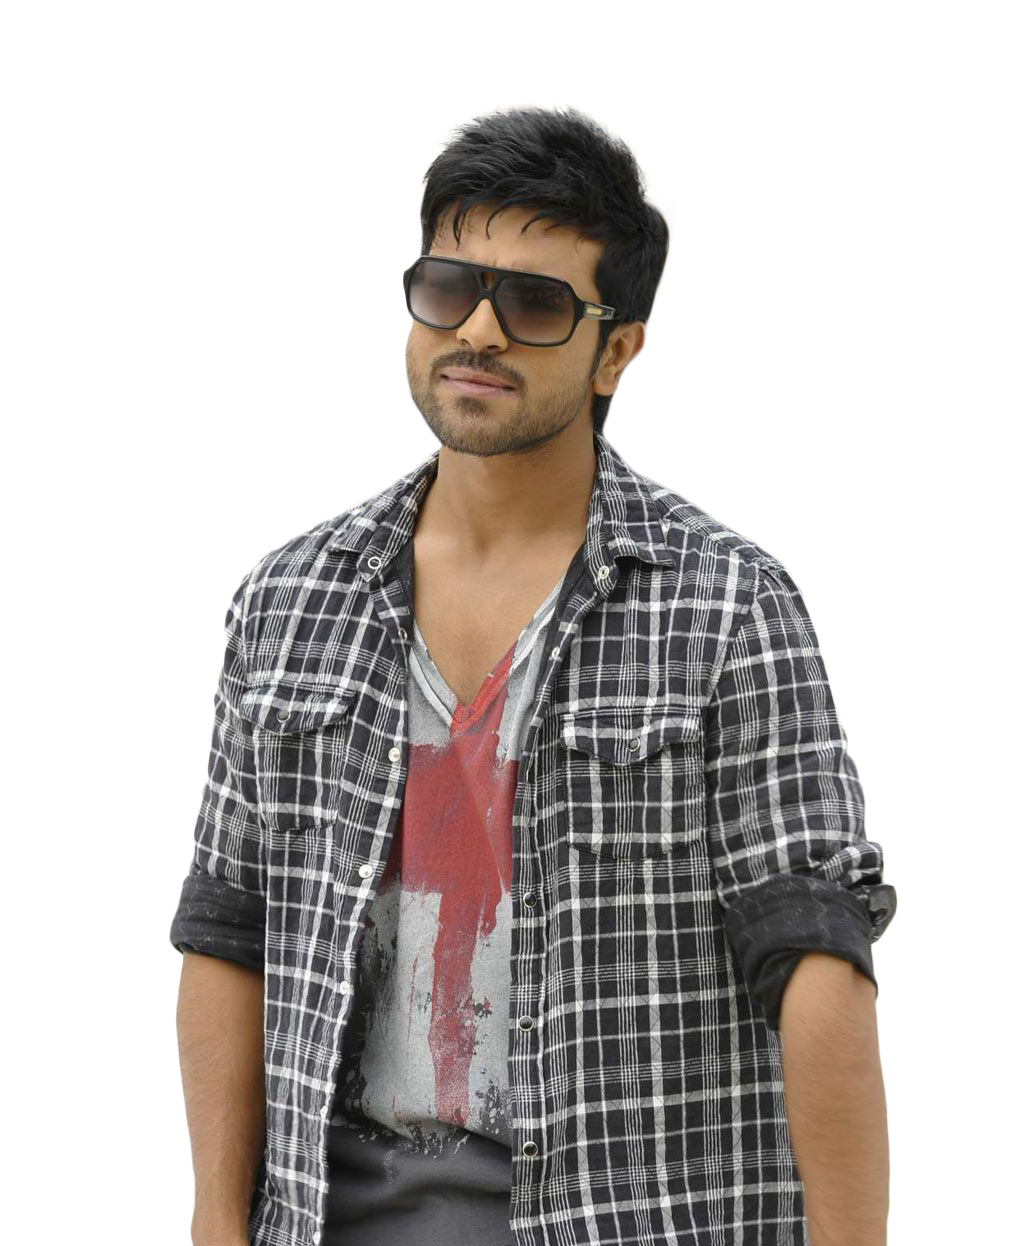 Ram Charan in Sunglasses PNG | OngPng